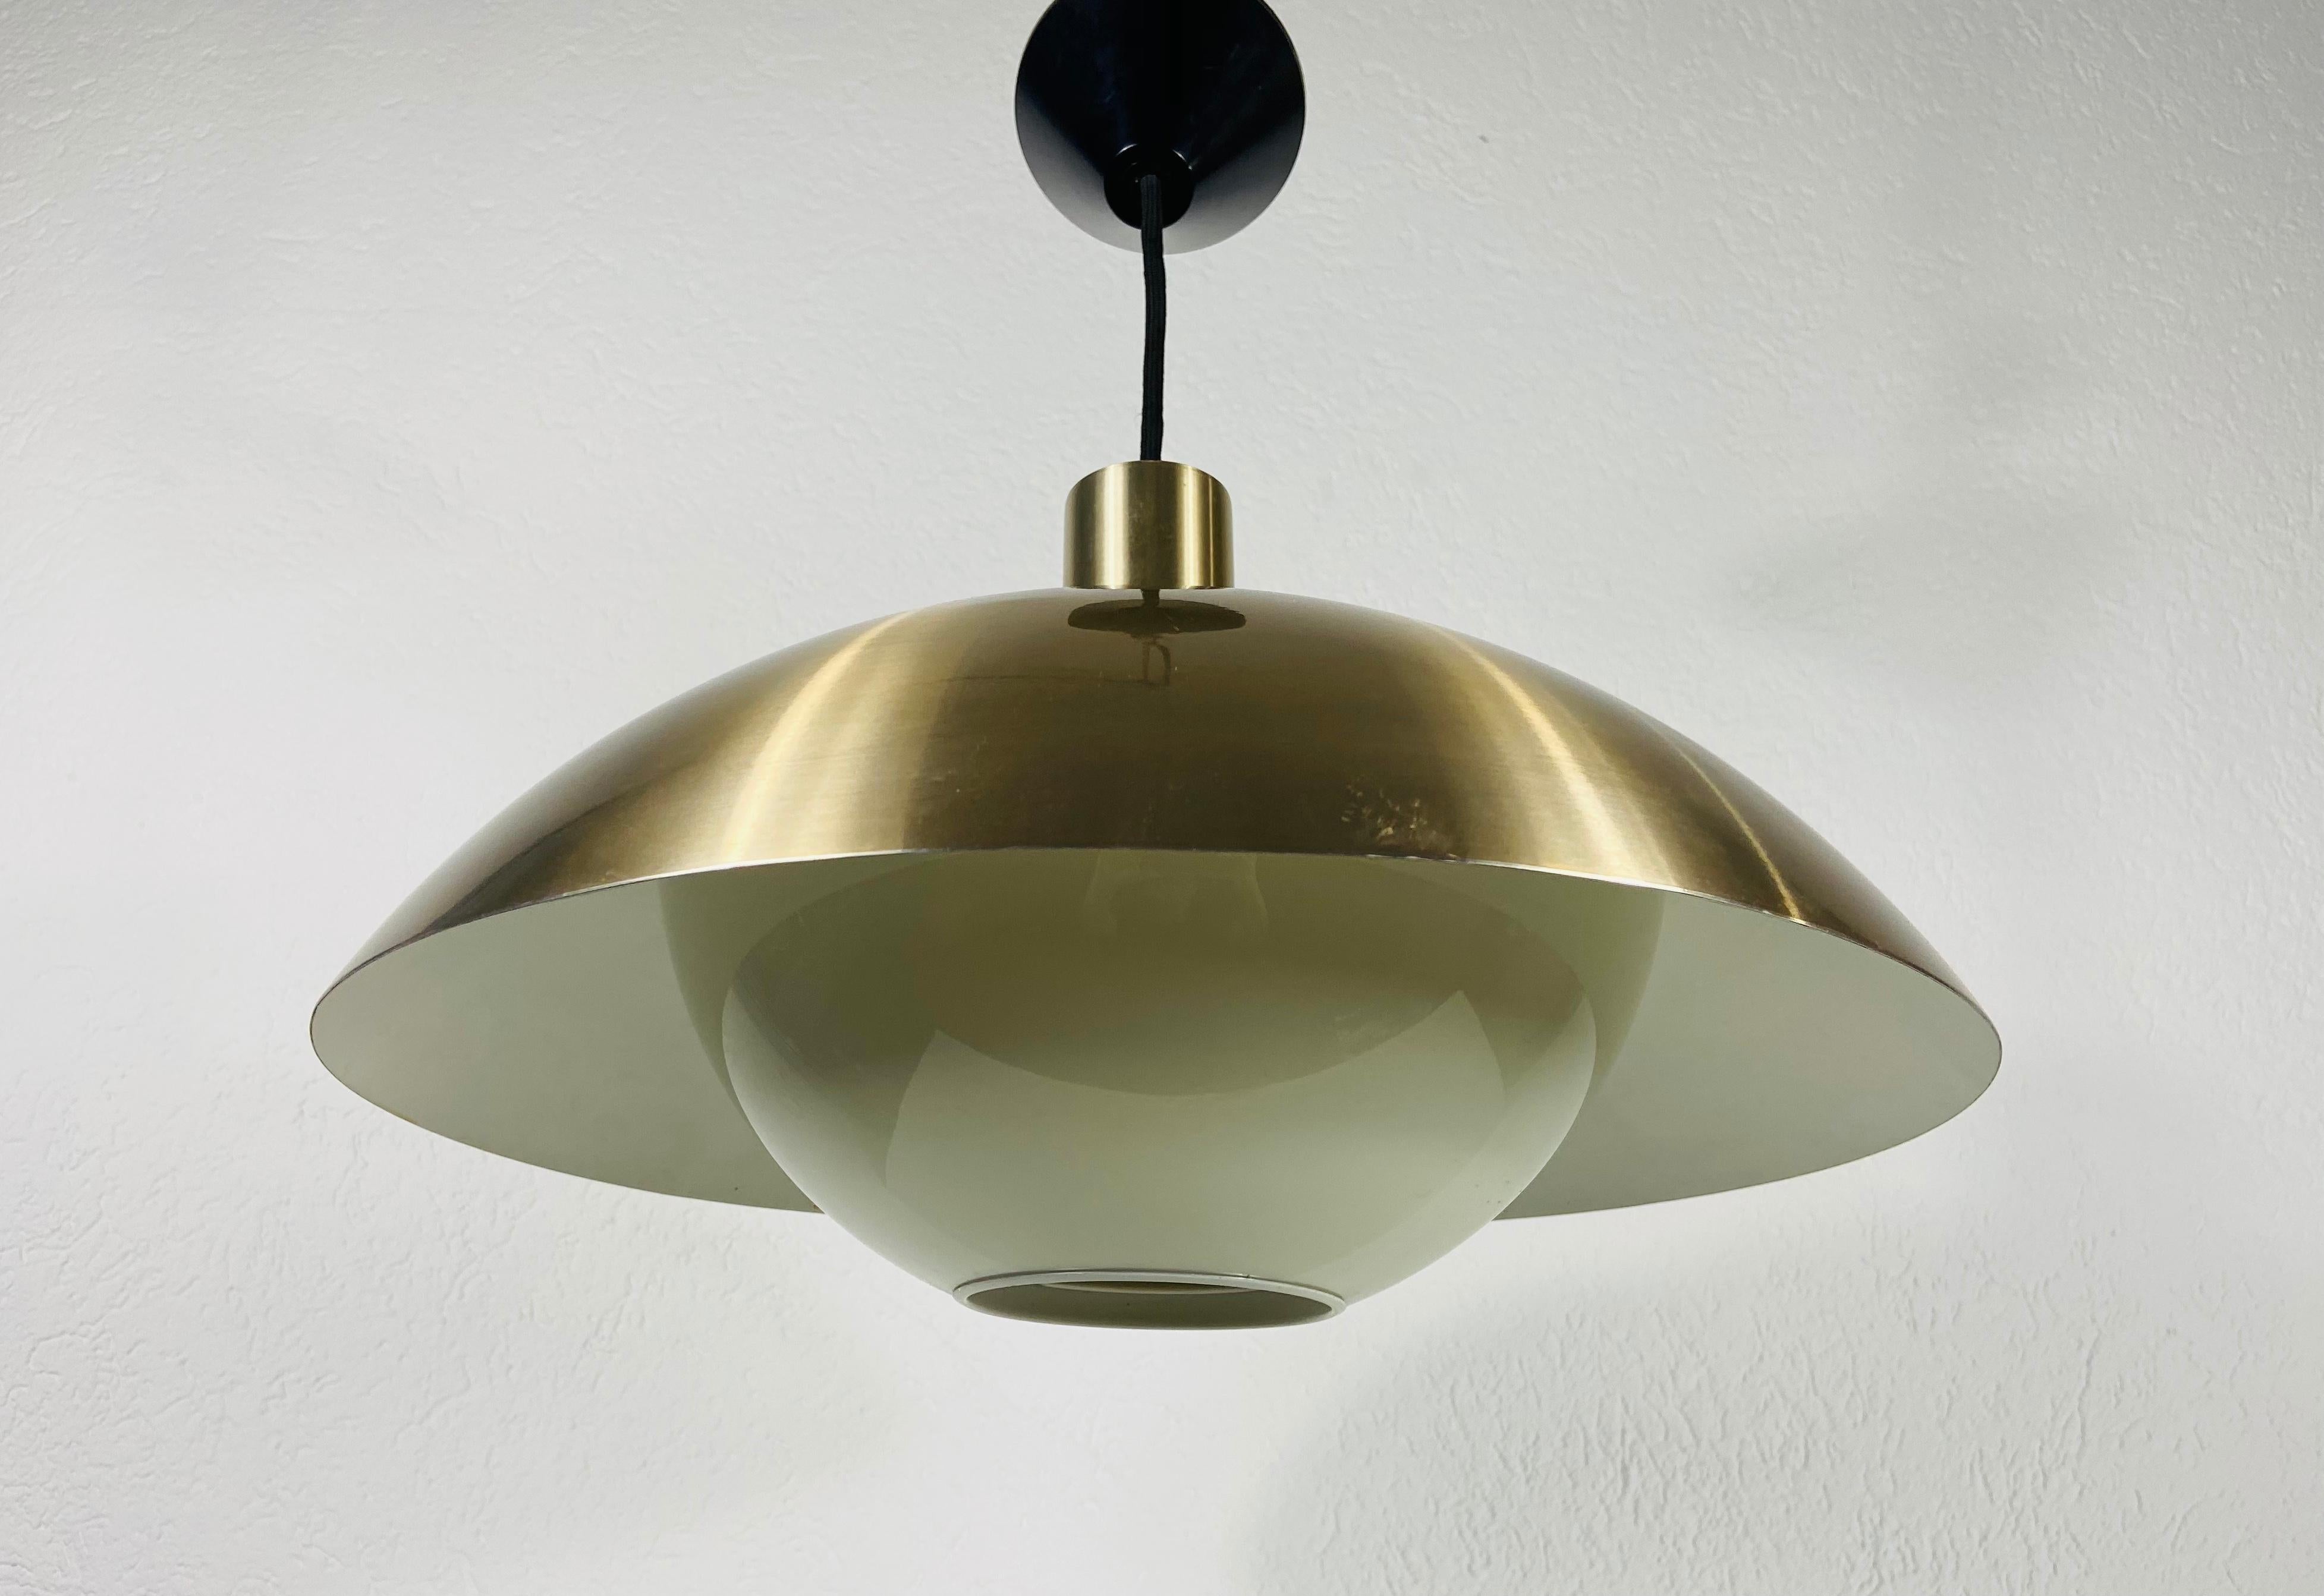 Danish plastic pendant lamp made in Denmark in the 1960s. The fixture gives a very beautiful light. It is made from thin aluminum and plastic.

The light requires one E27 (US E26) light bulb. Works with both 120/220V. 

Free worldwide express